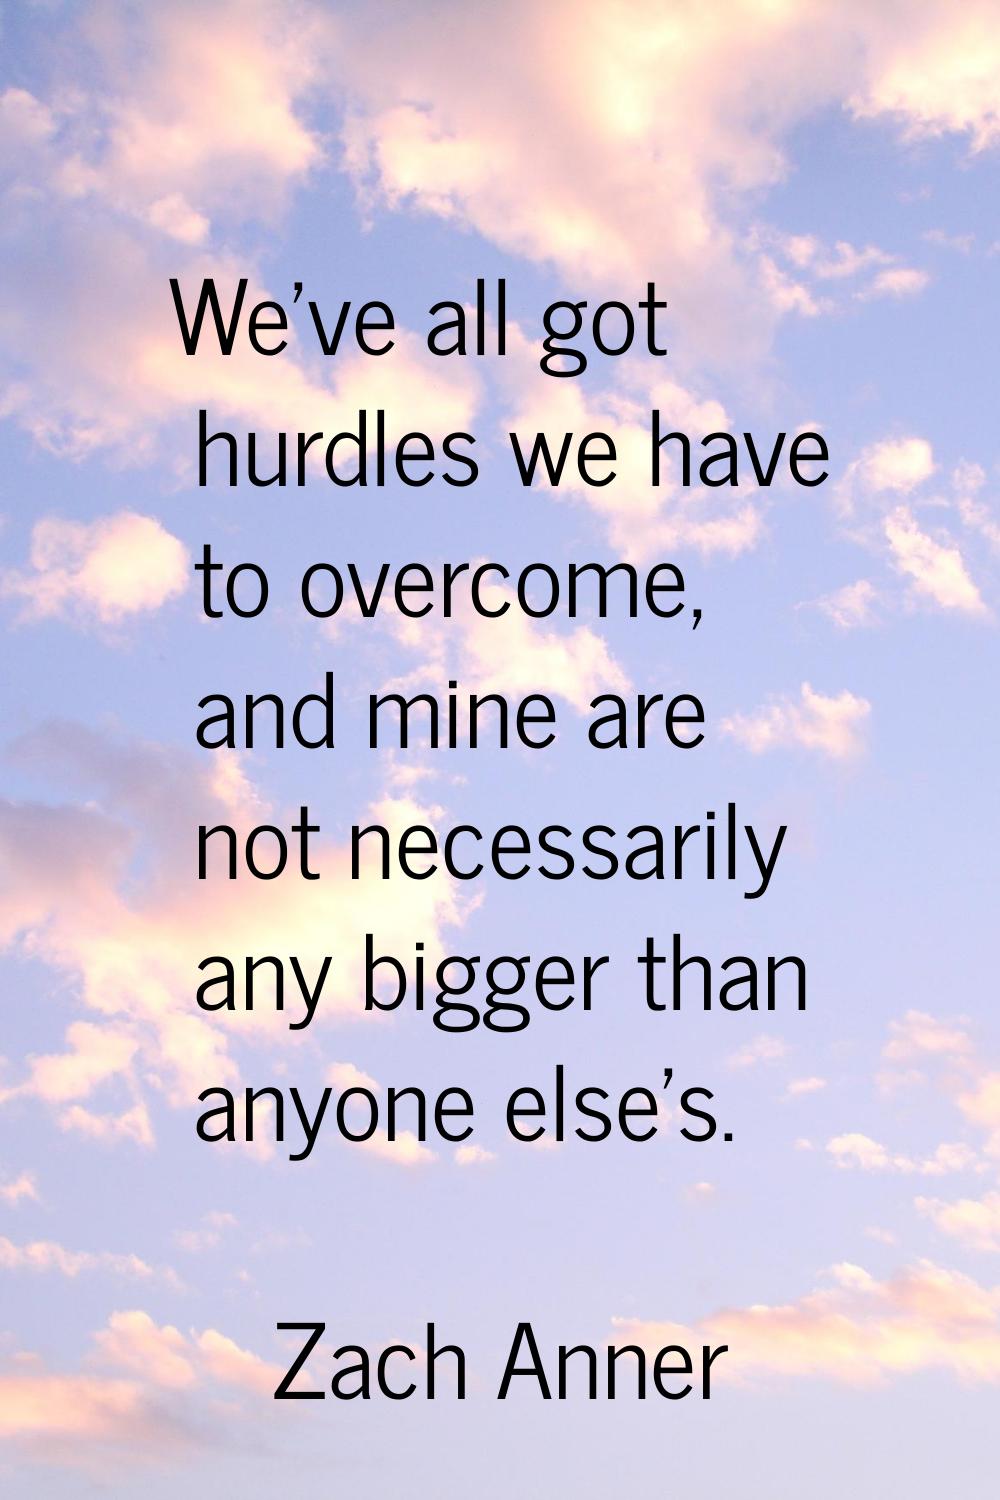 We've all got hurdles we have to overcome, and mine are not necessarily any bigger than anyone else